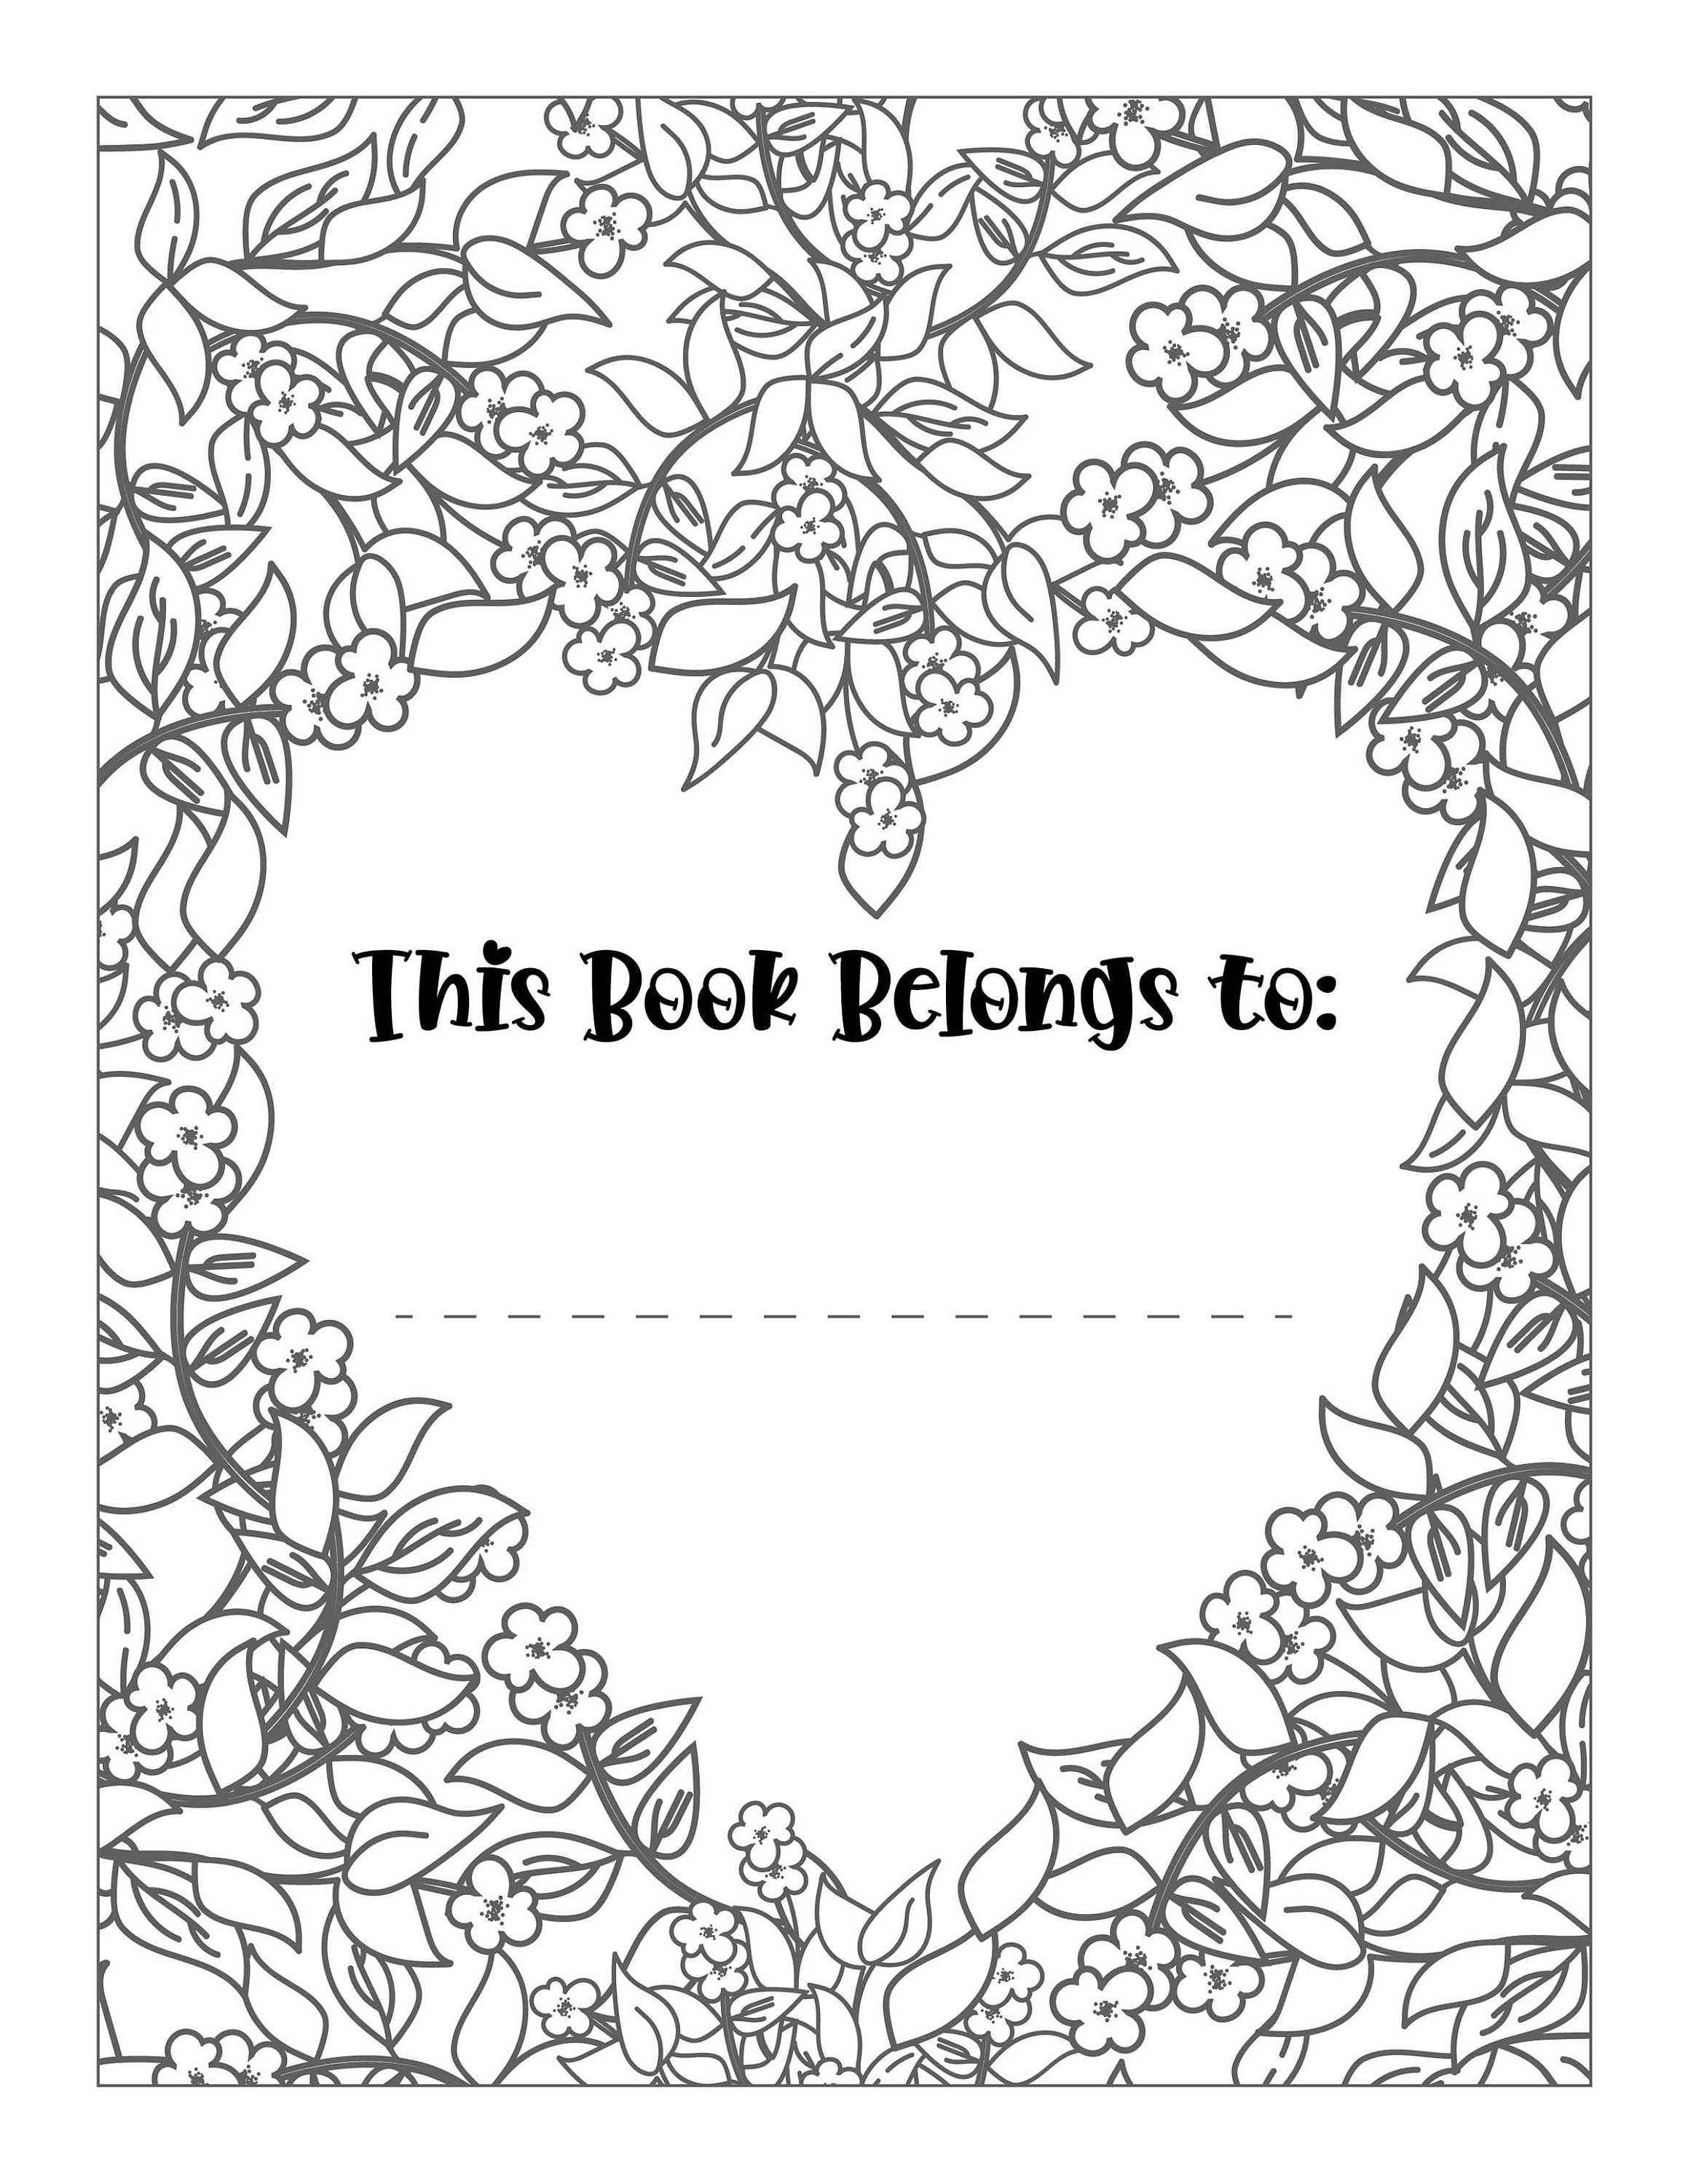 Motivational coloring book printable coloring pages black and white pages affirmations pages self care pages